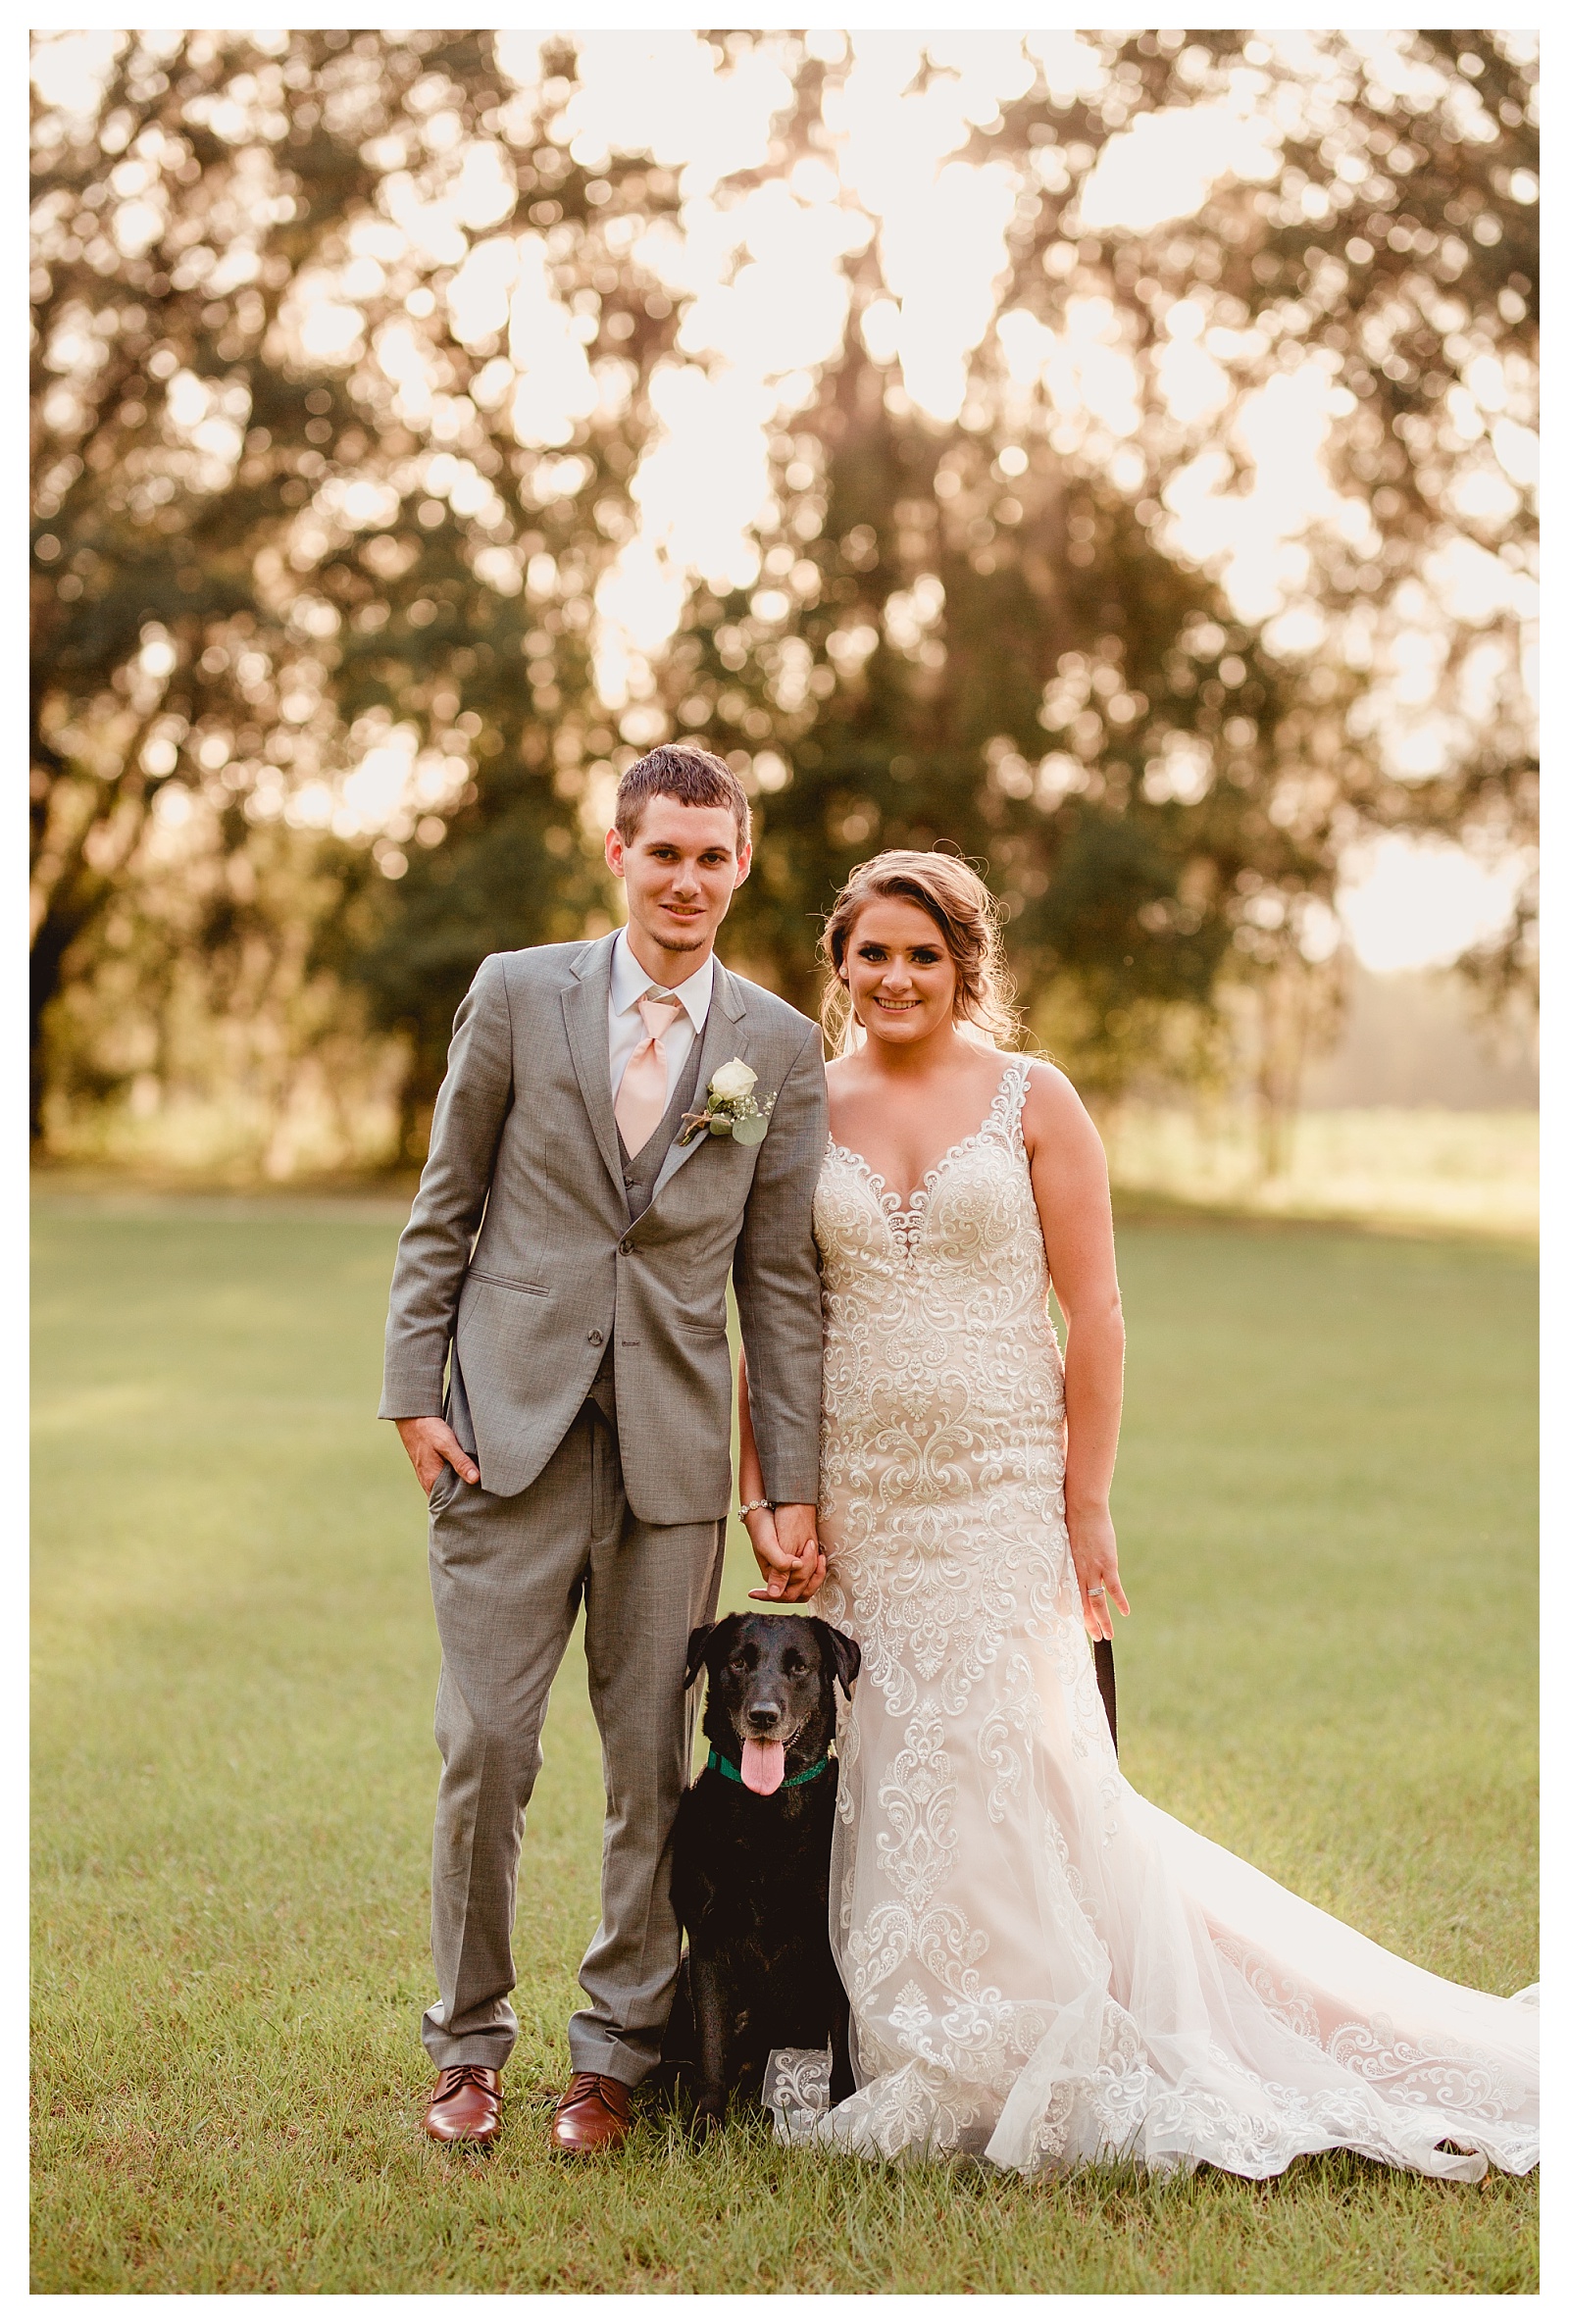 Family portrait of the dog, groom, and bride on their wedding day. Shelly Williams Photography